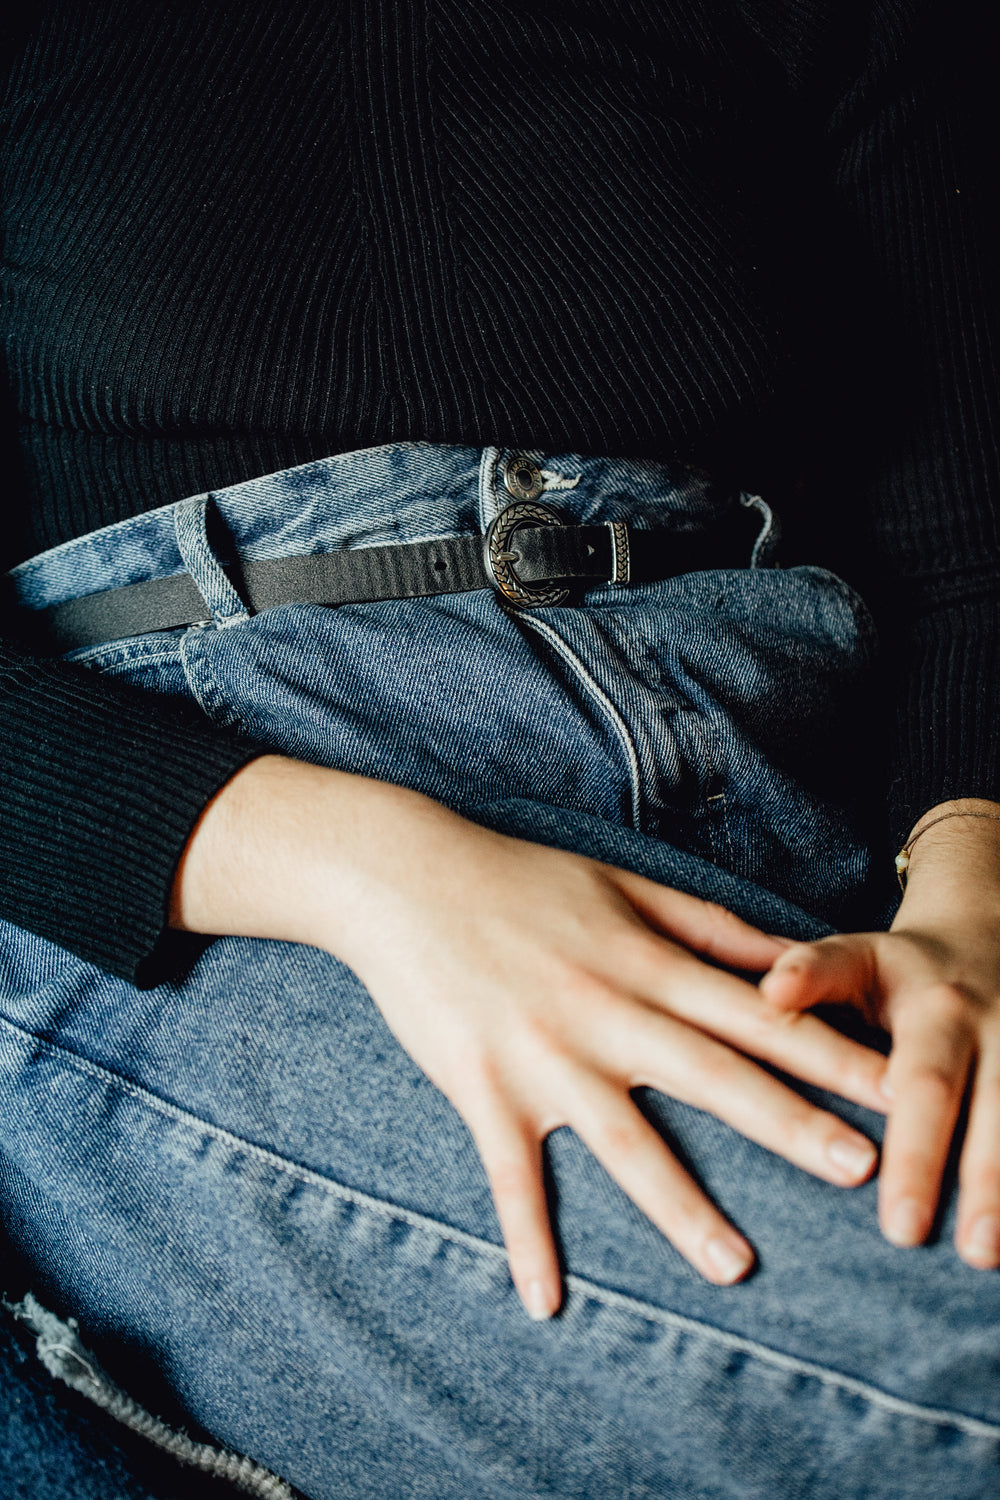 persons in blue jeans lays their hands on their thighs